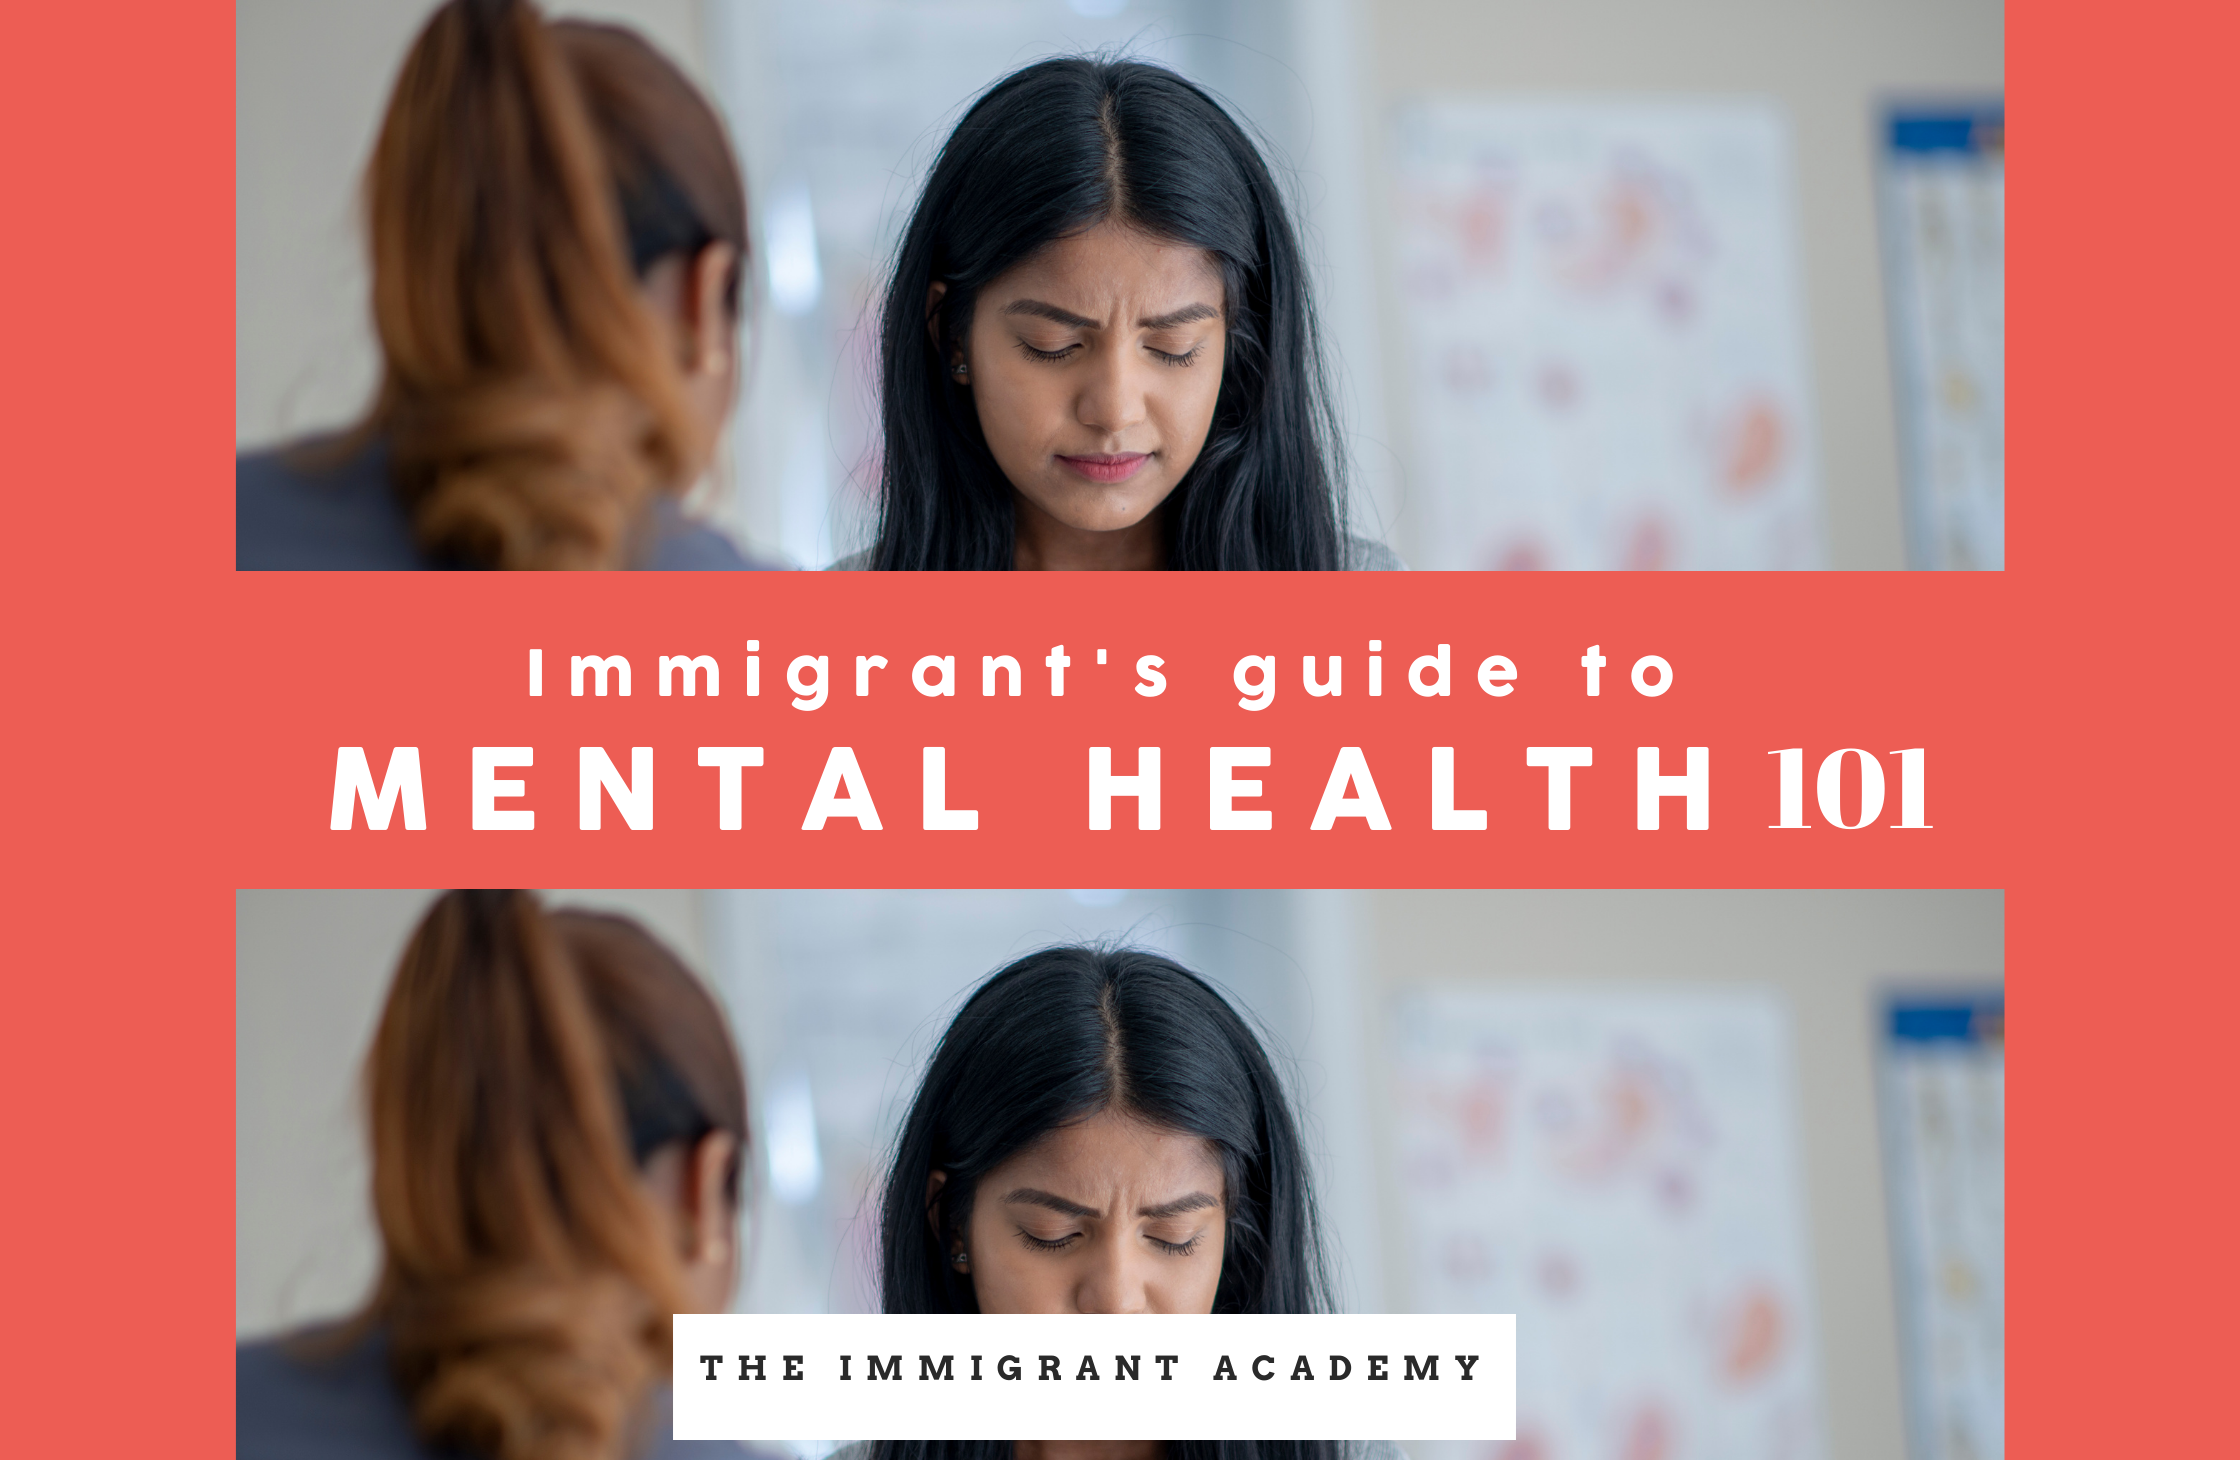 Immigrant's guide to mental health